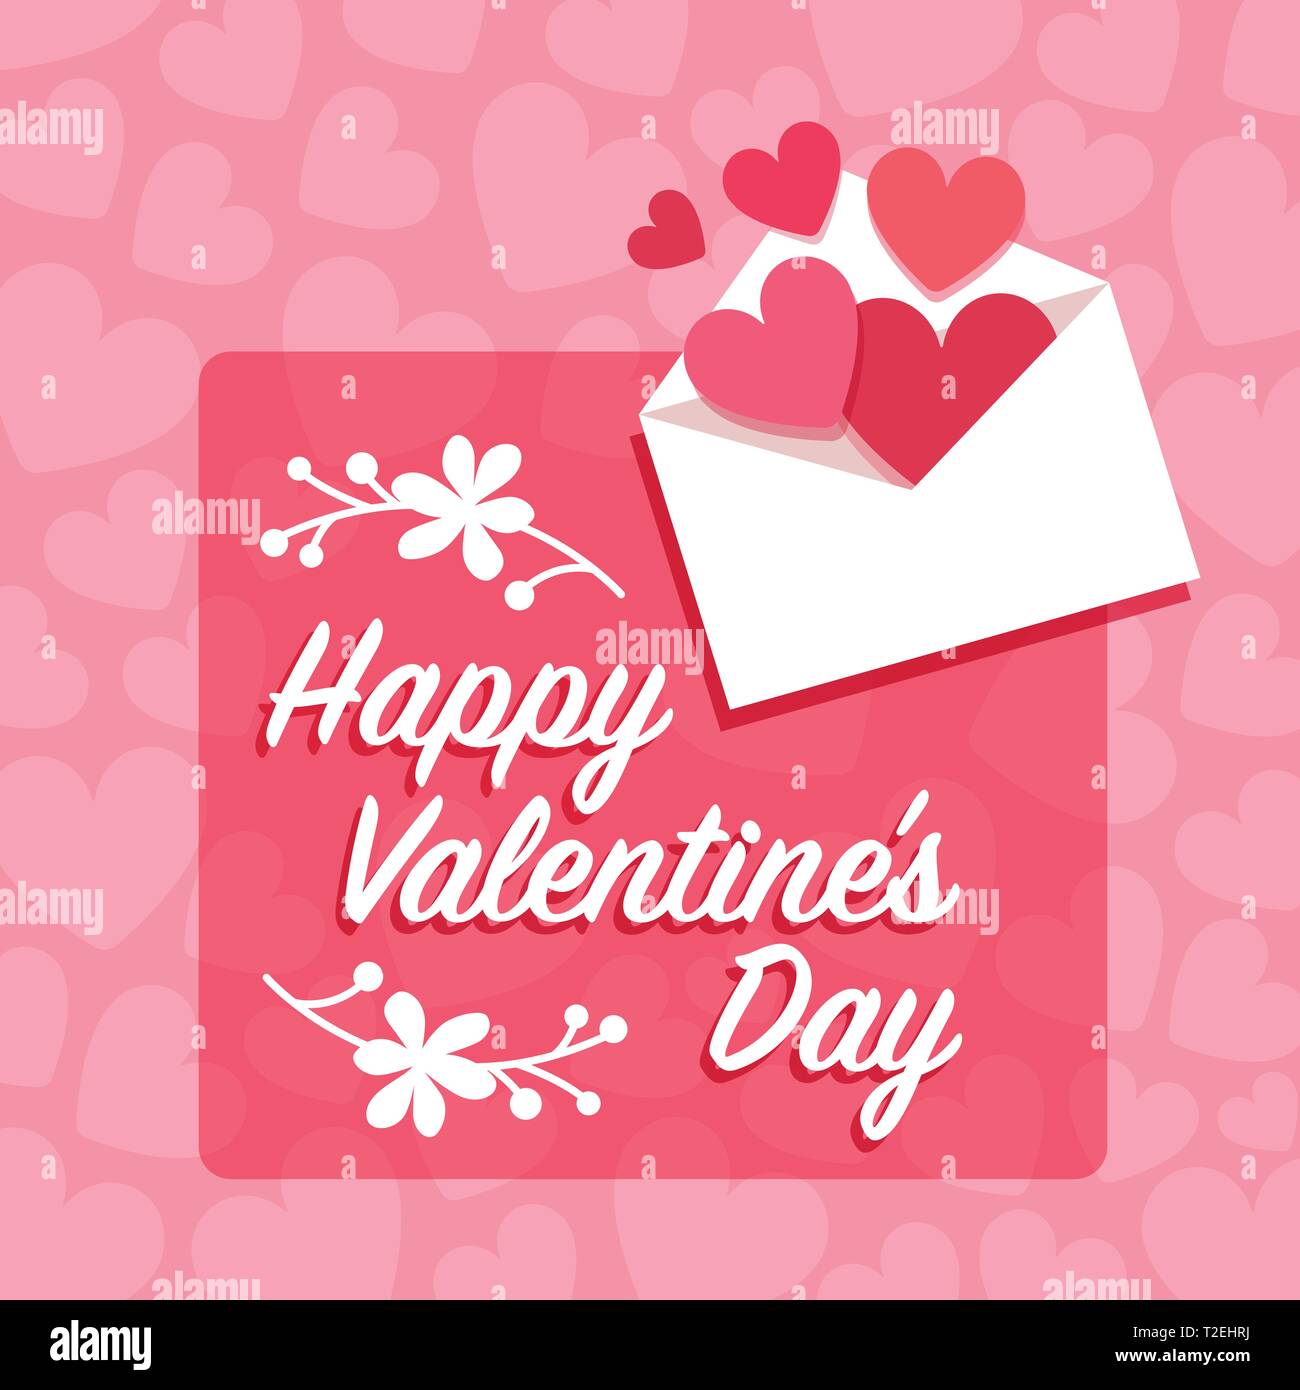 Happy Valentine's day design with love message and envelope Stock Vector